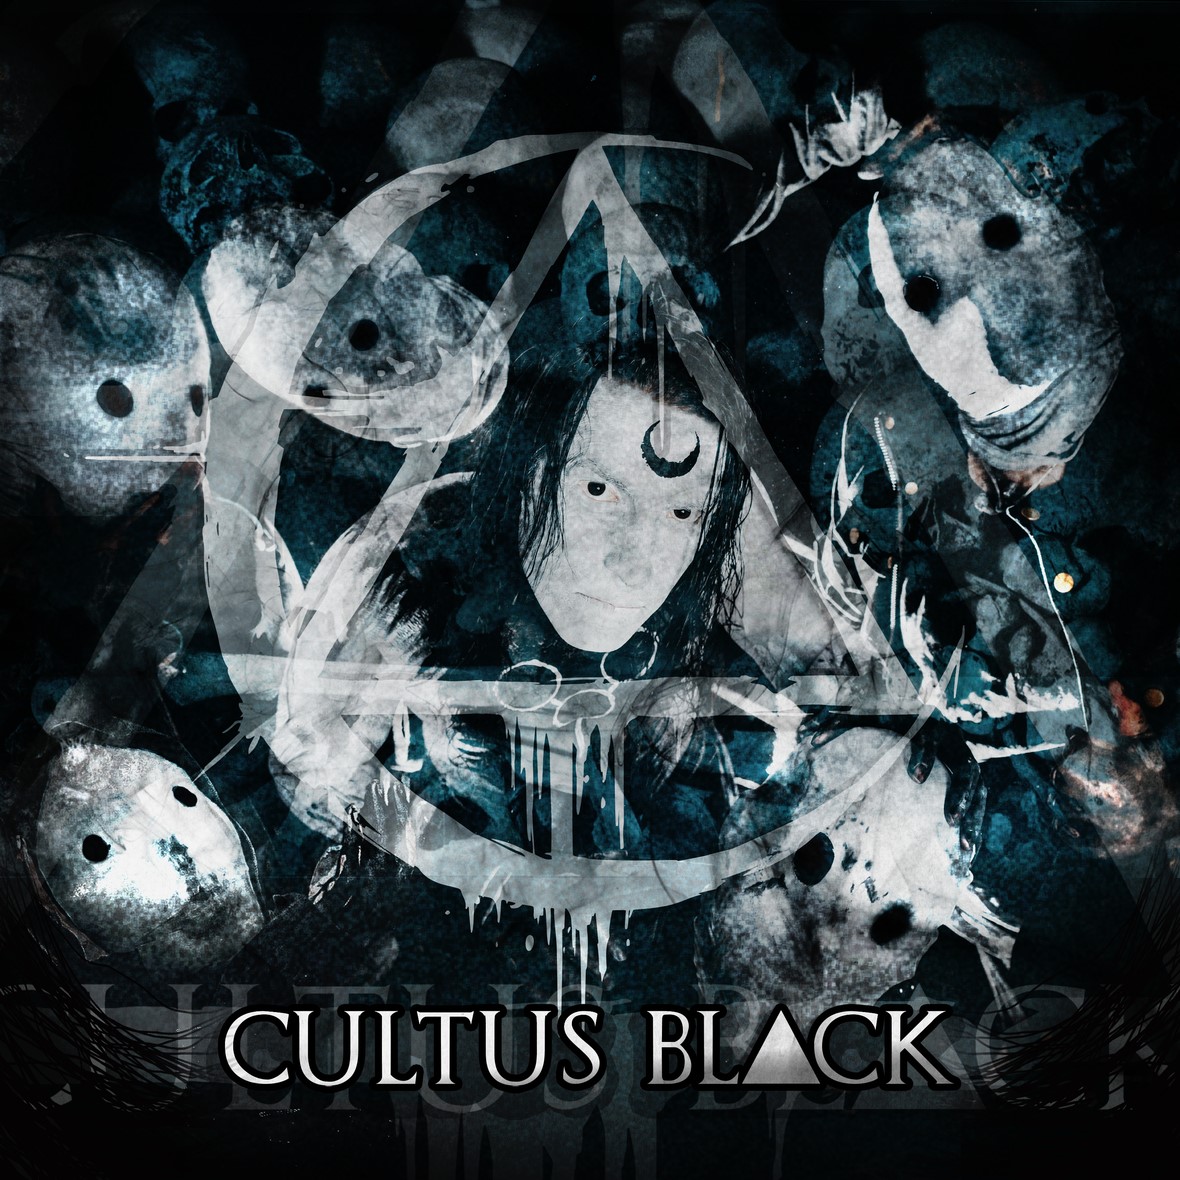 Cultus Black Releases Self-Titled Album to all major platforms!; Joins “Rise of the Machines” Tour with bands Static-X, Fear Factory, Dope, Mushroomhead and Twiztid